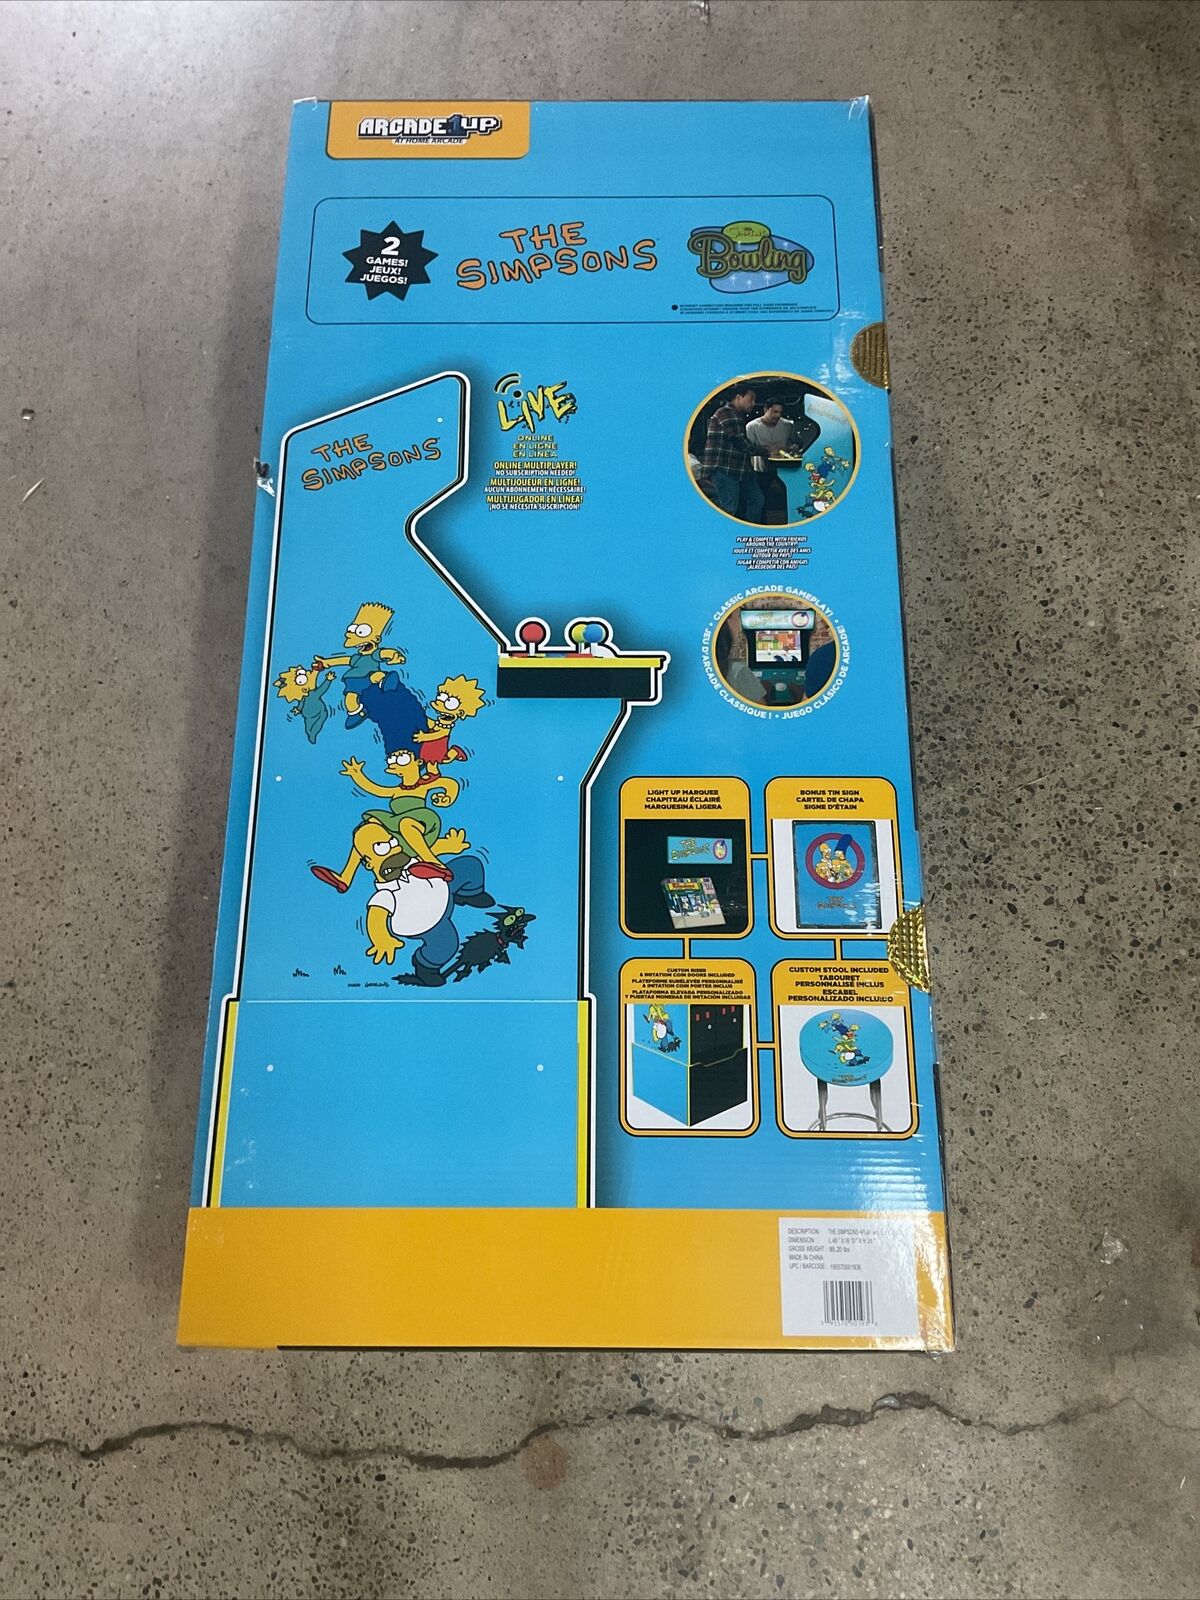 Arcade1up The Simpsons 30th Edition Arcade Machine with Stool - SIM-A-01251